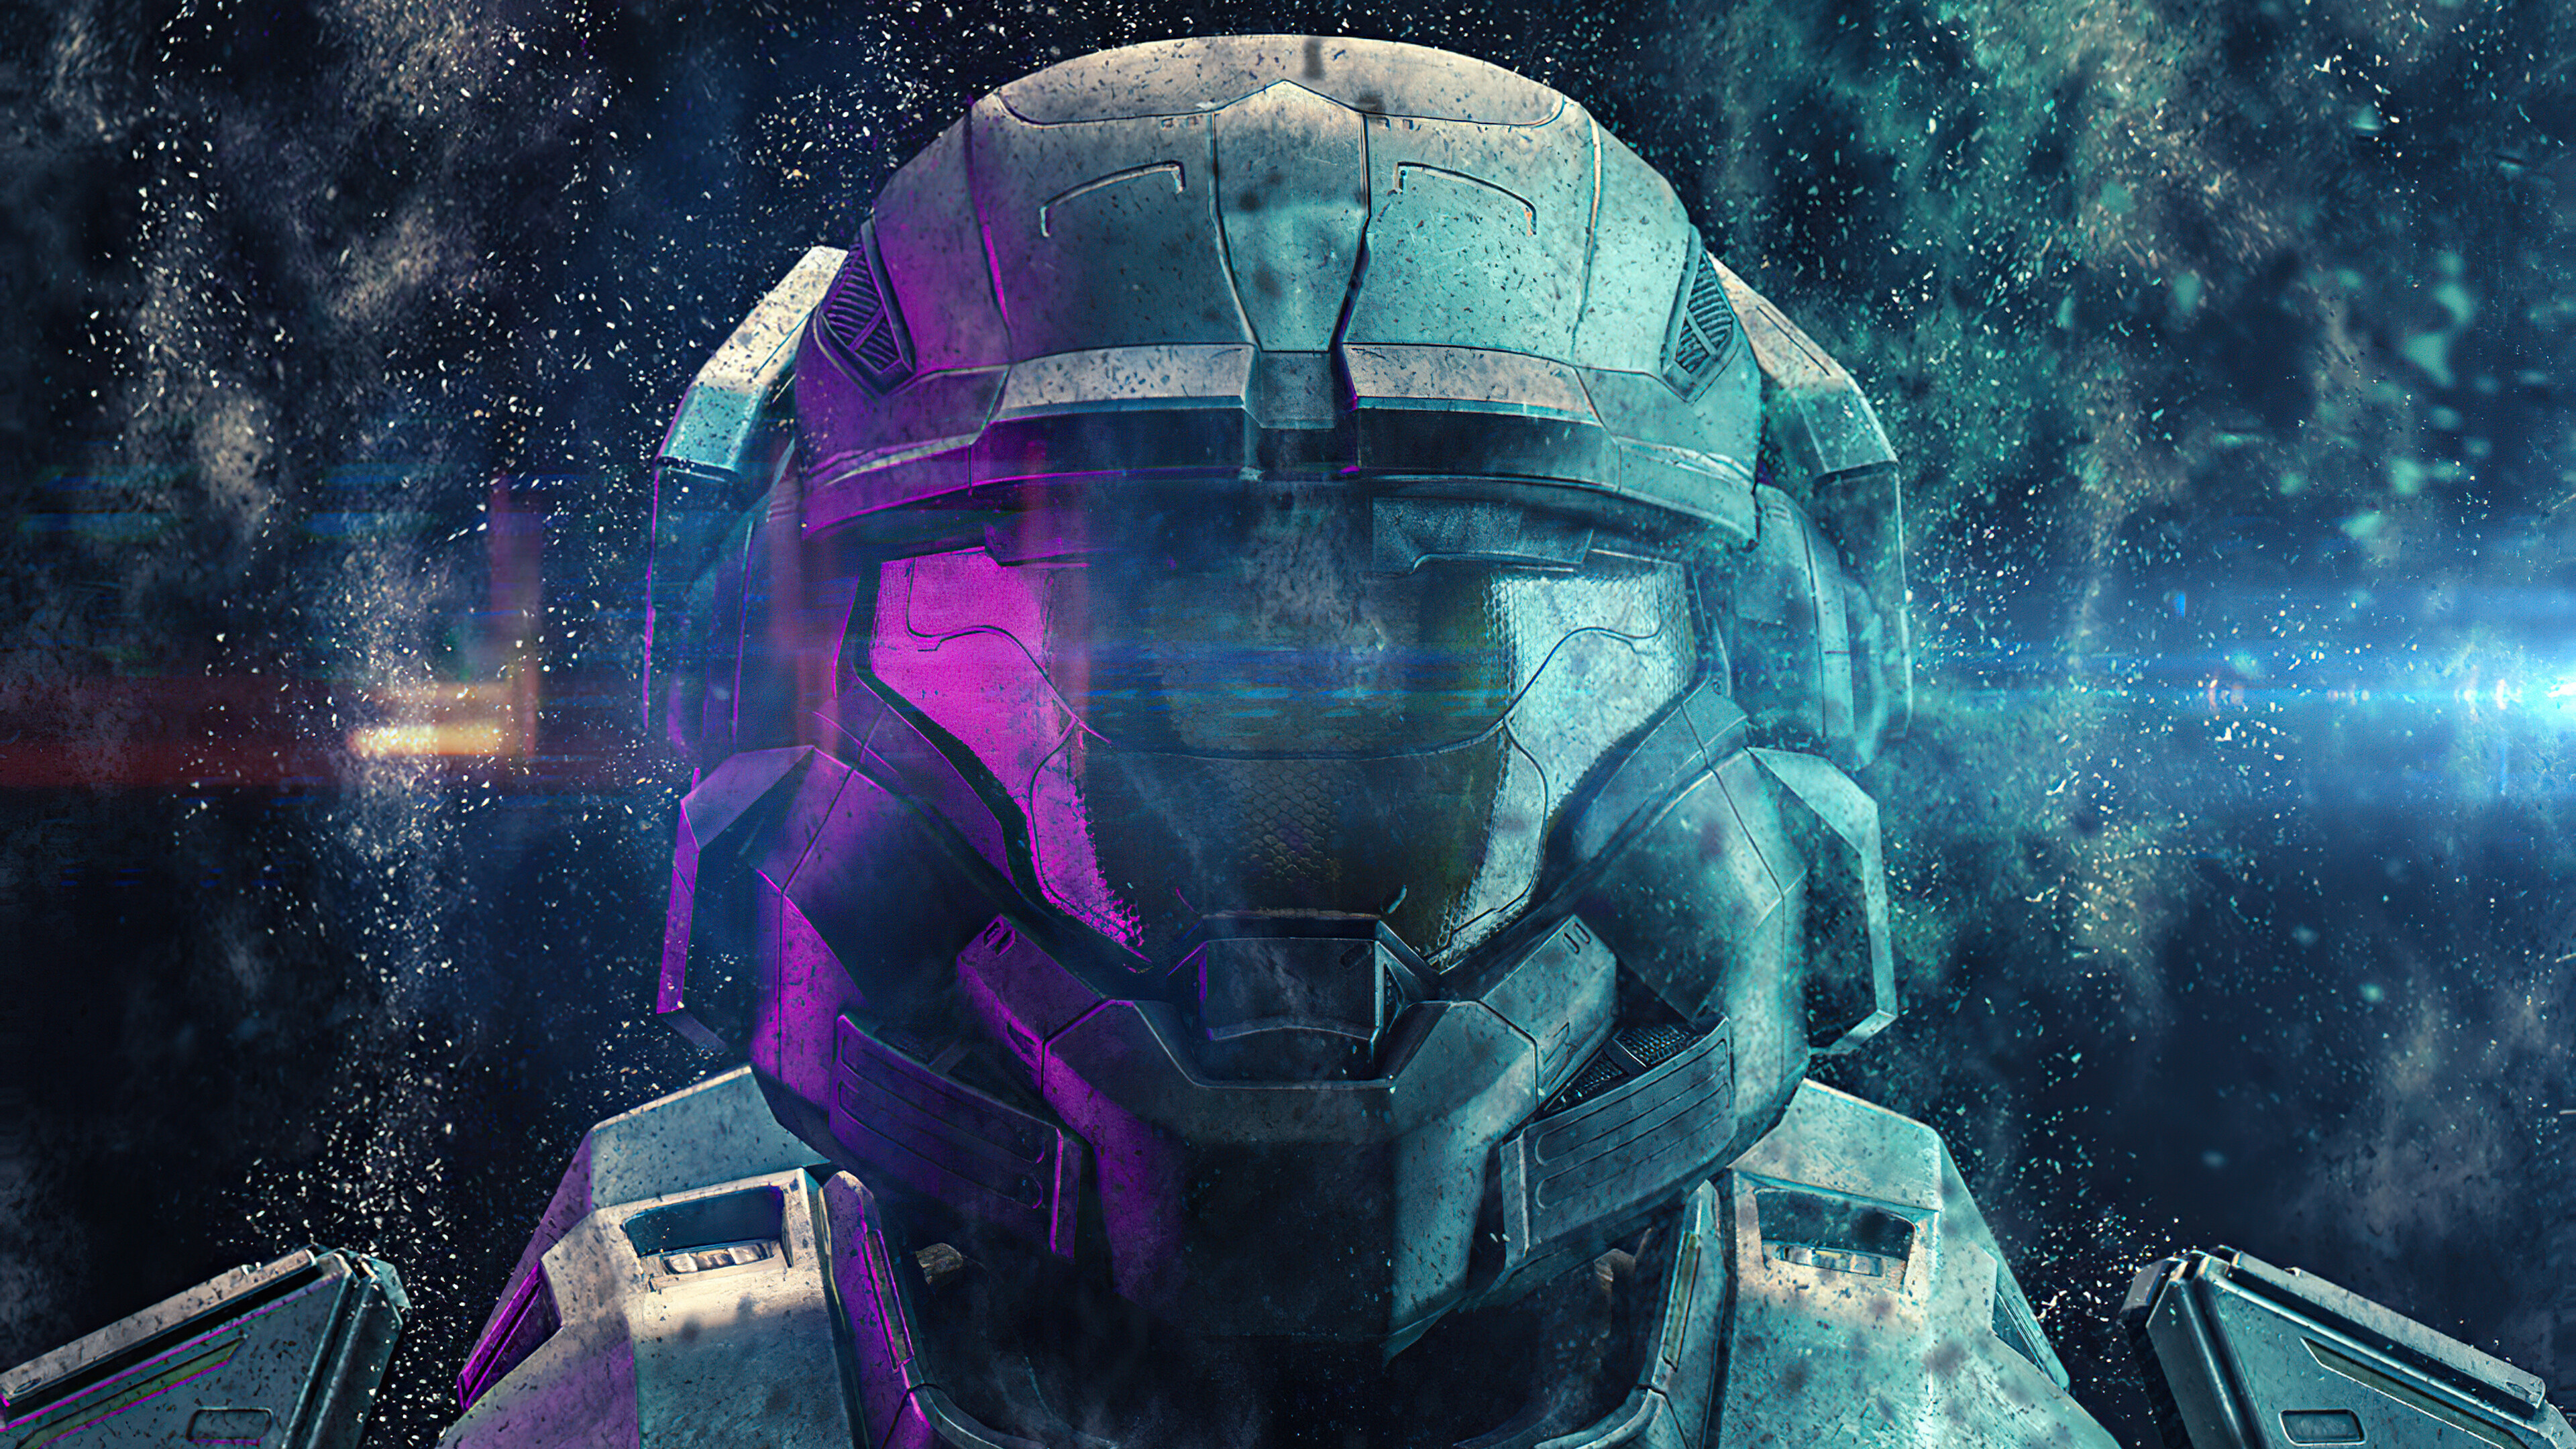 Halo: A fictional character and the protagonist in the multimedia franchise, Master Chief. 3840x2160 4K Background.